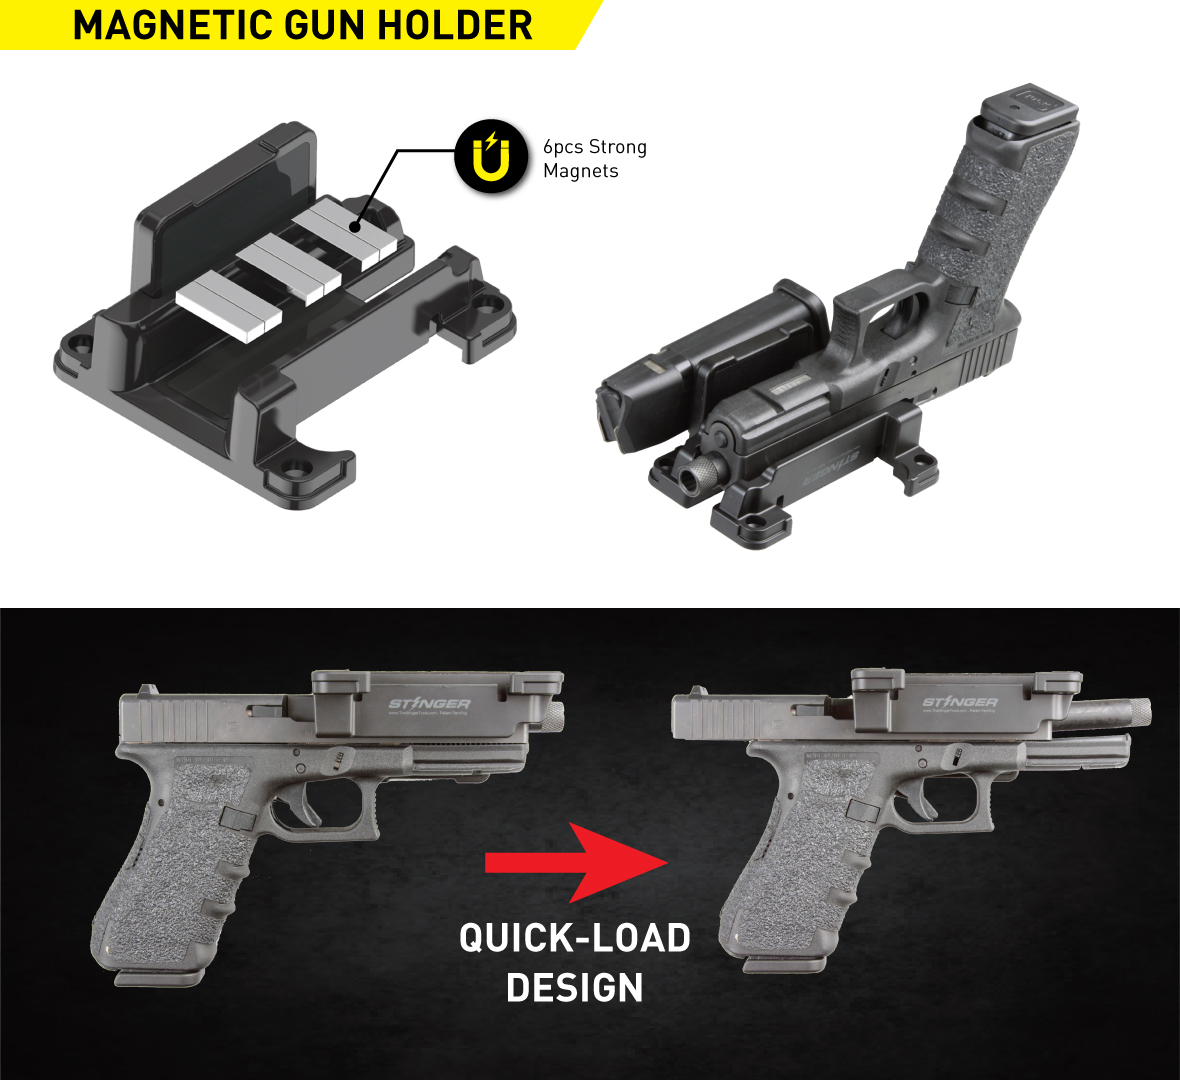 Stinger QUICK-LOAD Gun & Magazine Magnetic Holder Fits Most Semi-Auto Pistols for Left Hand and Right Hand